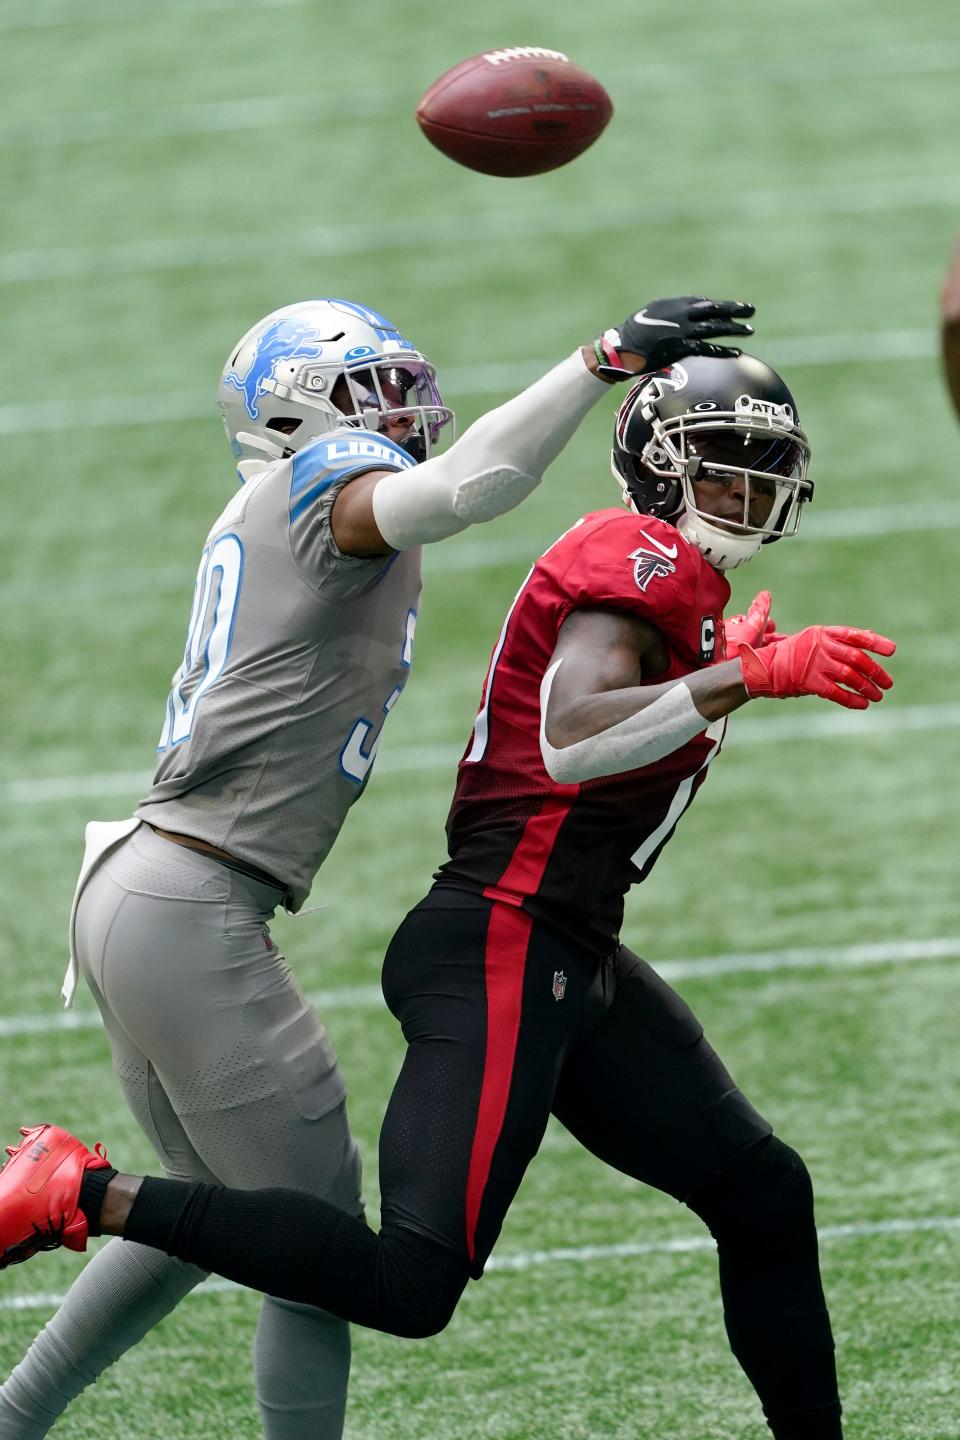 Lions cornerback Jeff Okudah breaks up a pass intended for Falcons receiver Julio Jones during the first half on Sunday, Oct. 25, 2020, in Atlanta.